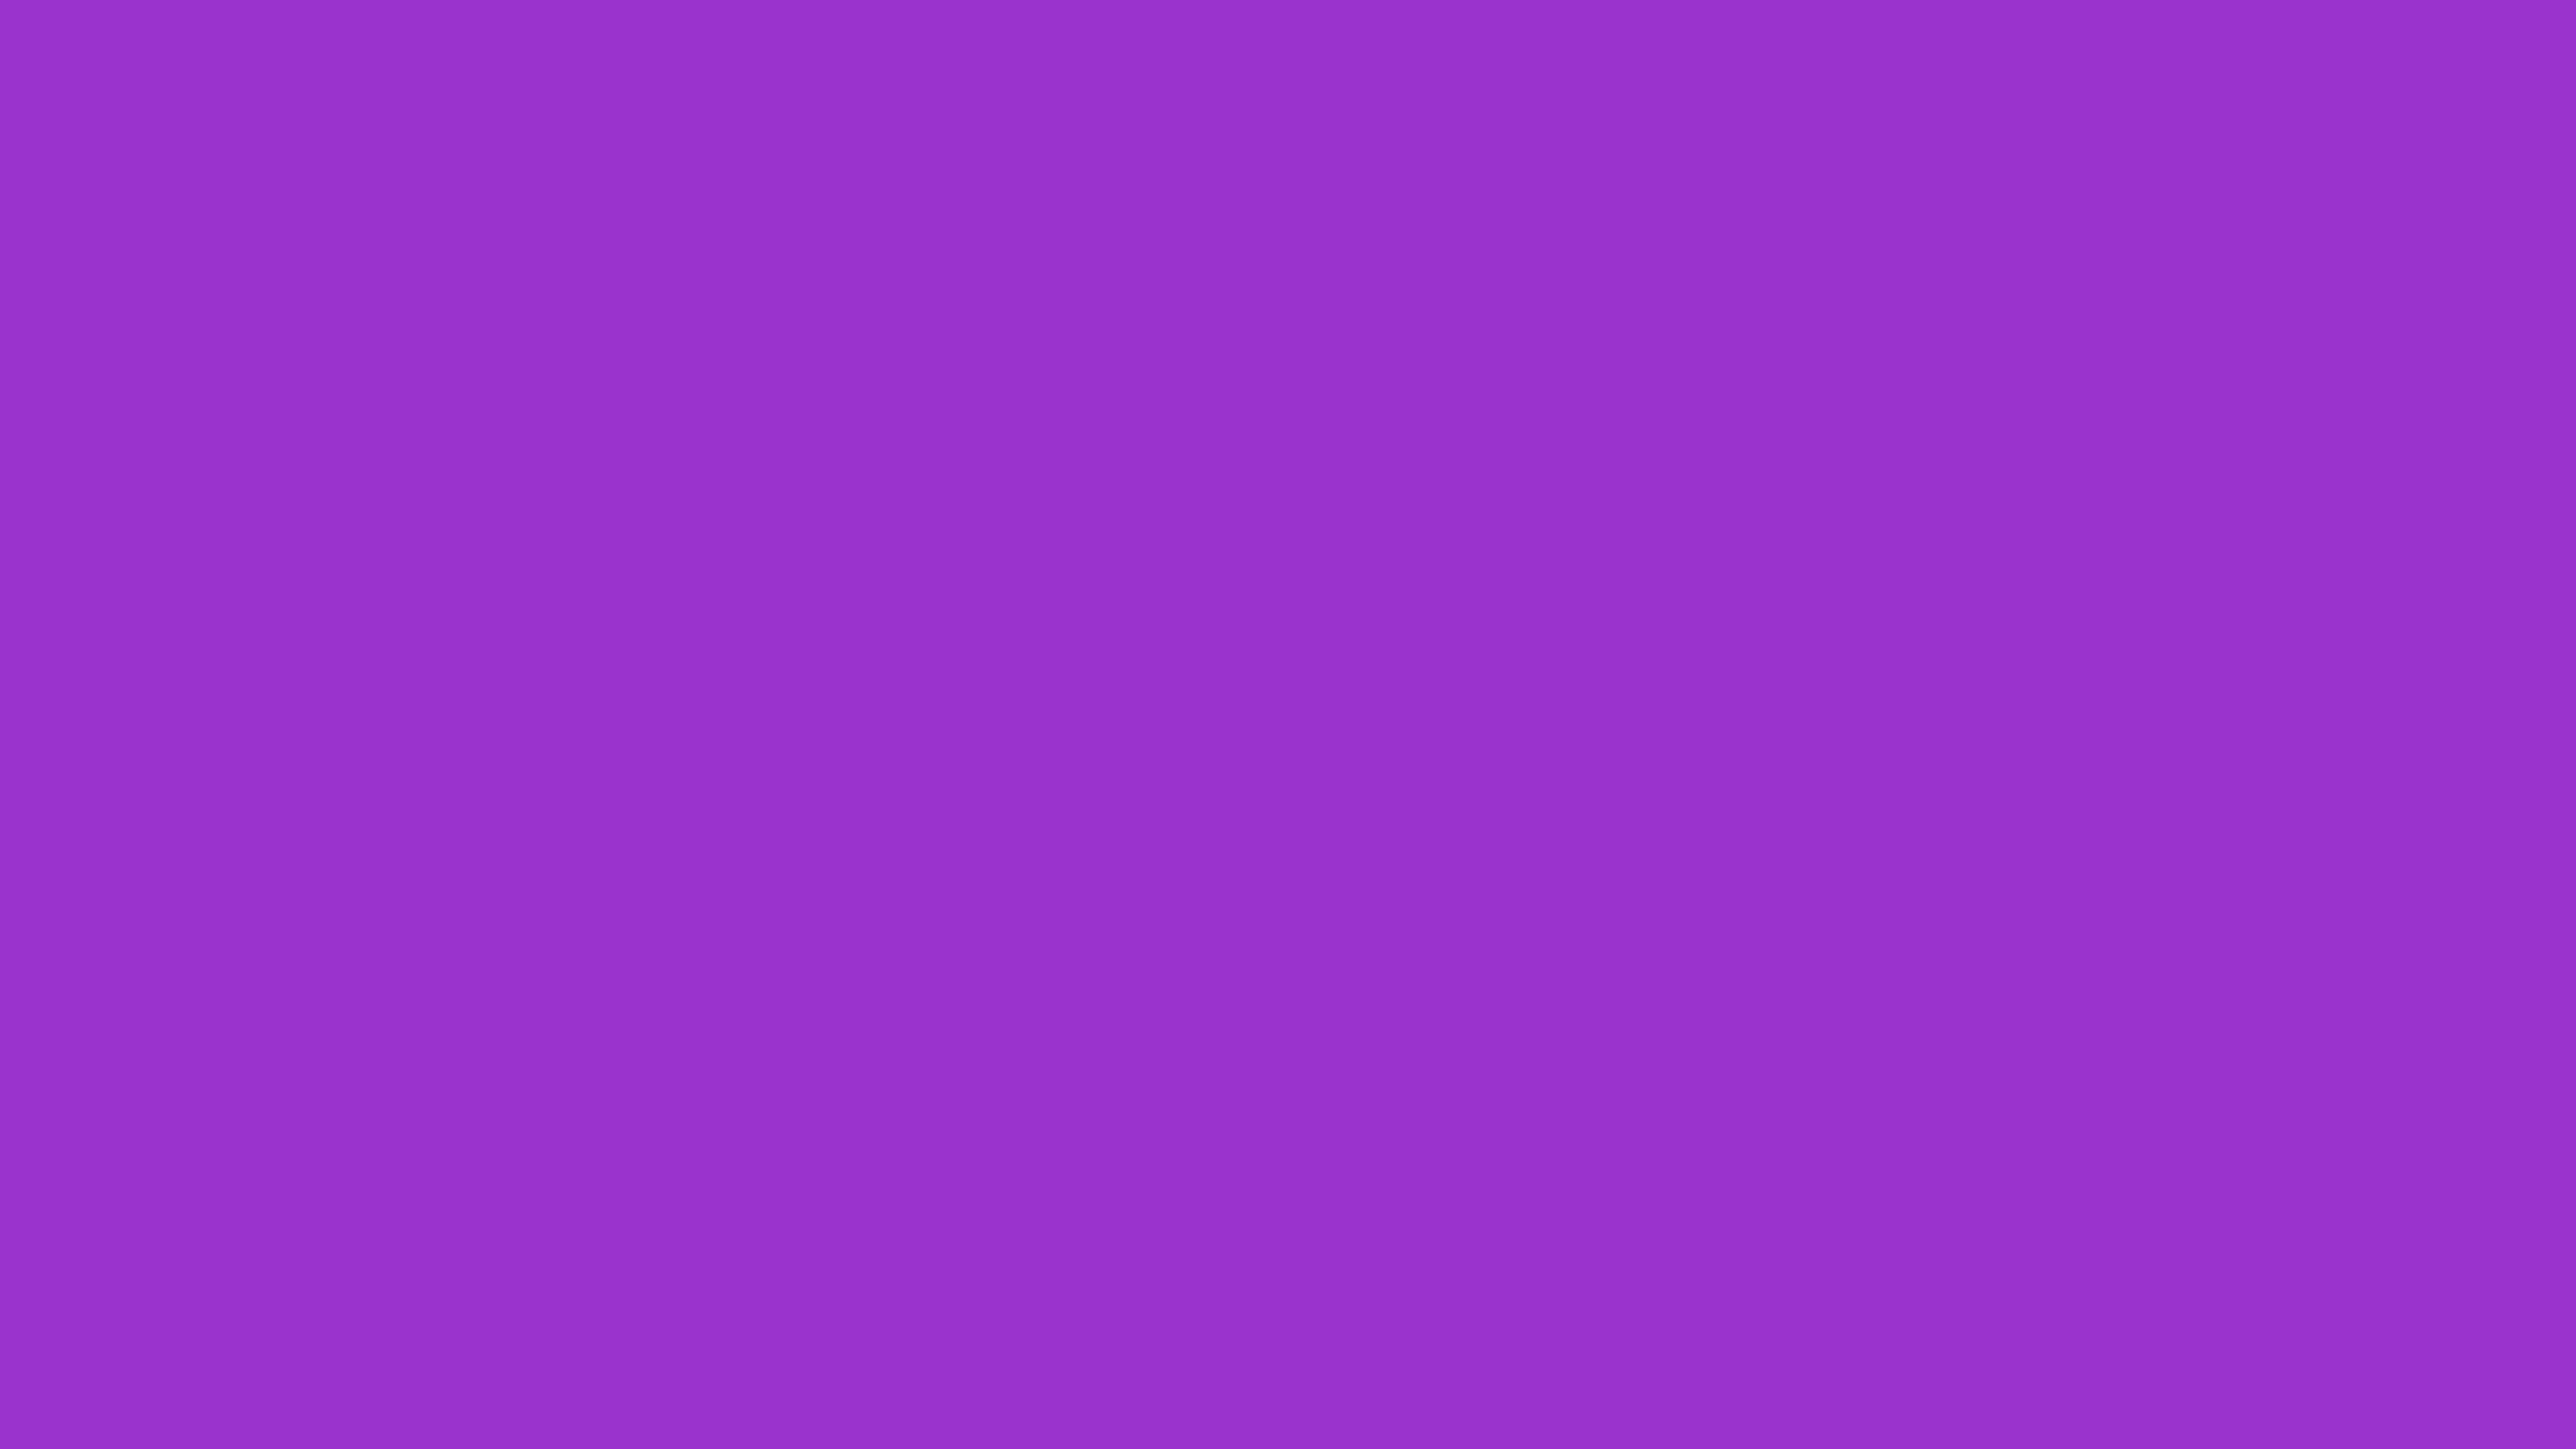 7680x4320 Dark Orchid Solid Color Background